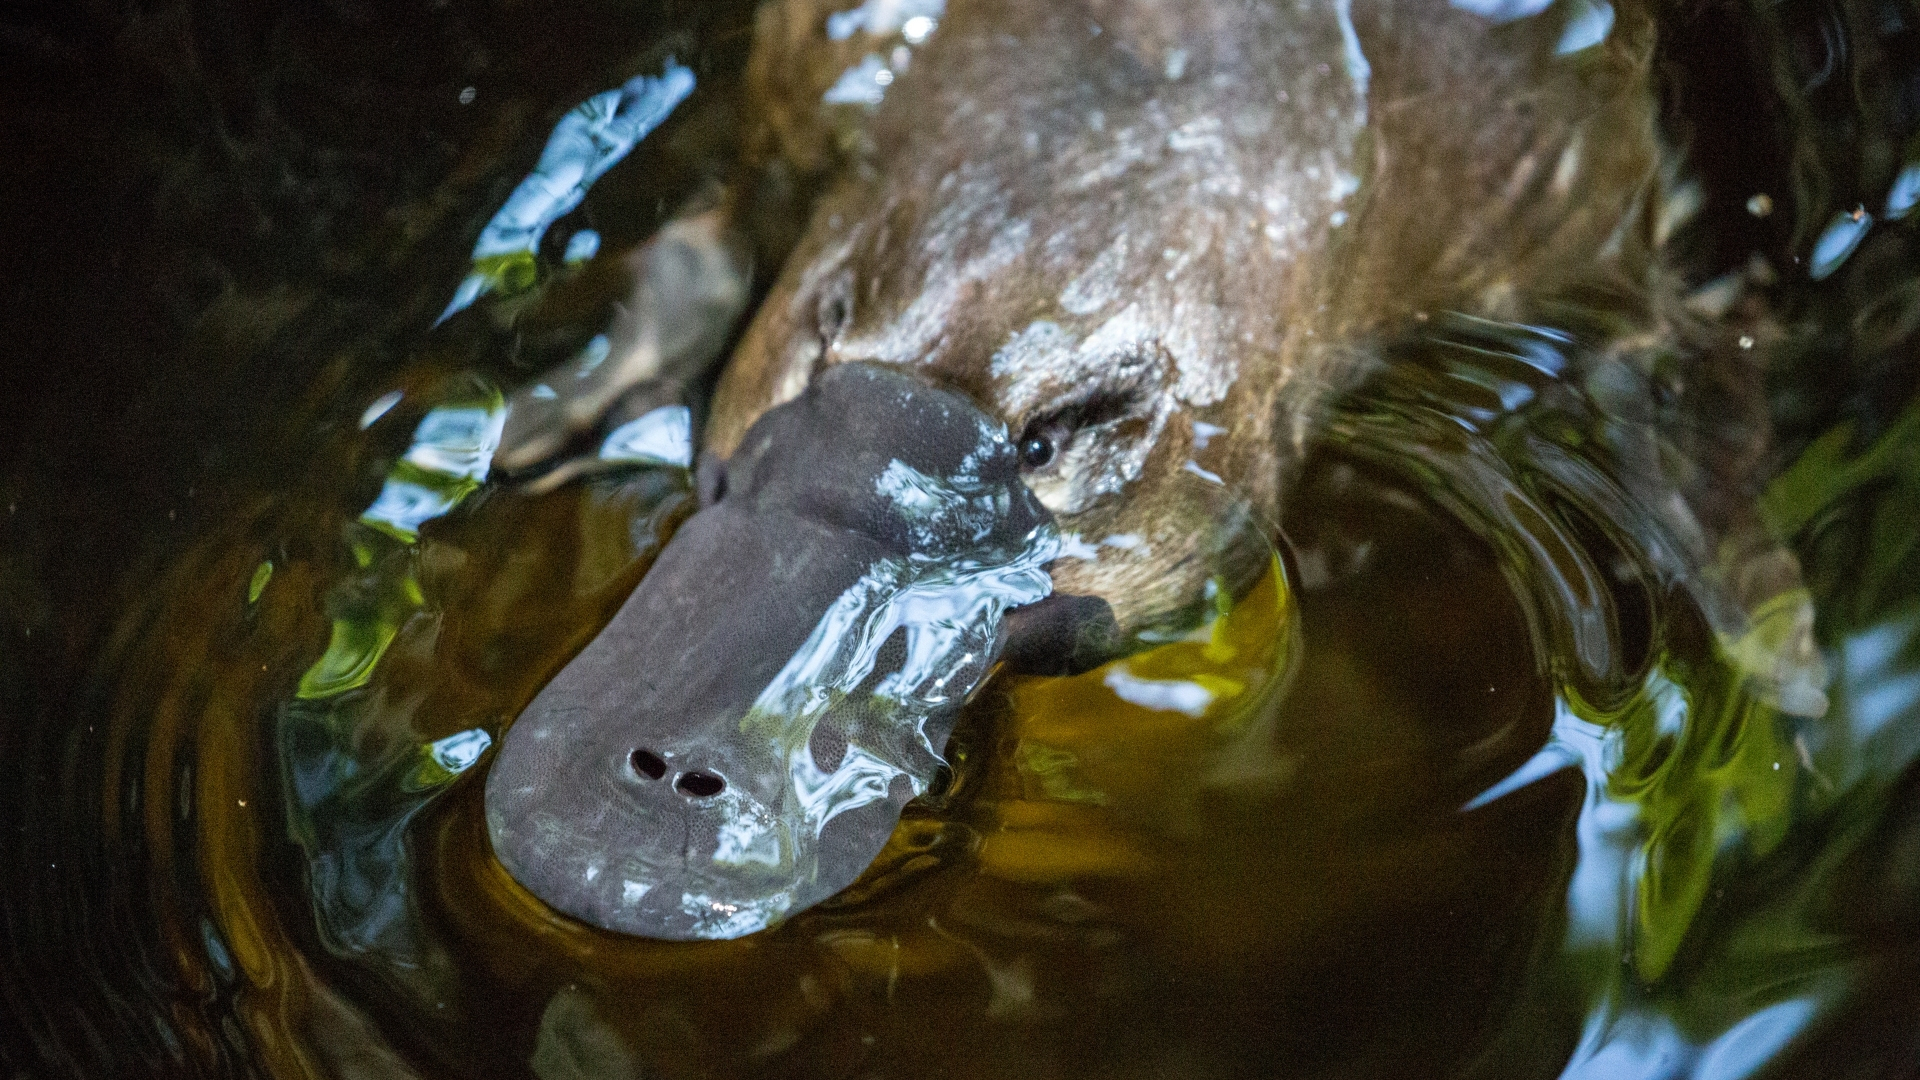 The platypus: national icon